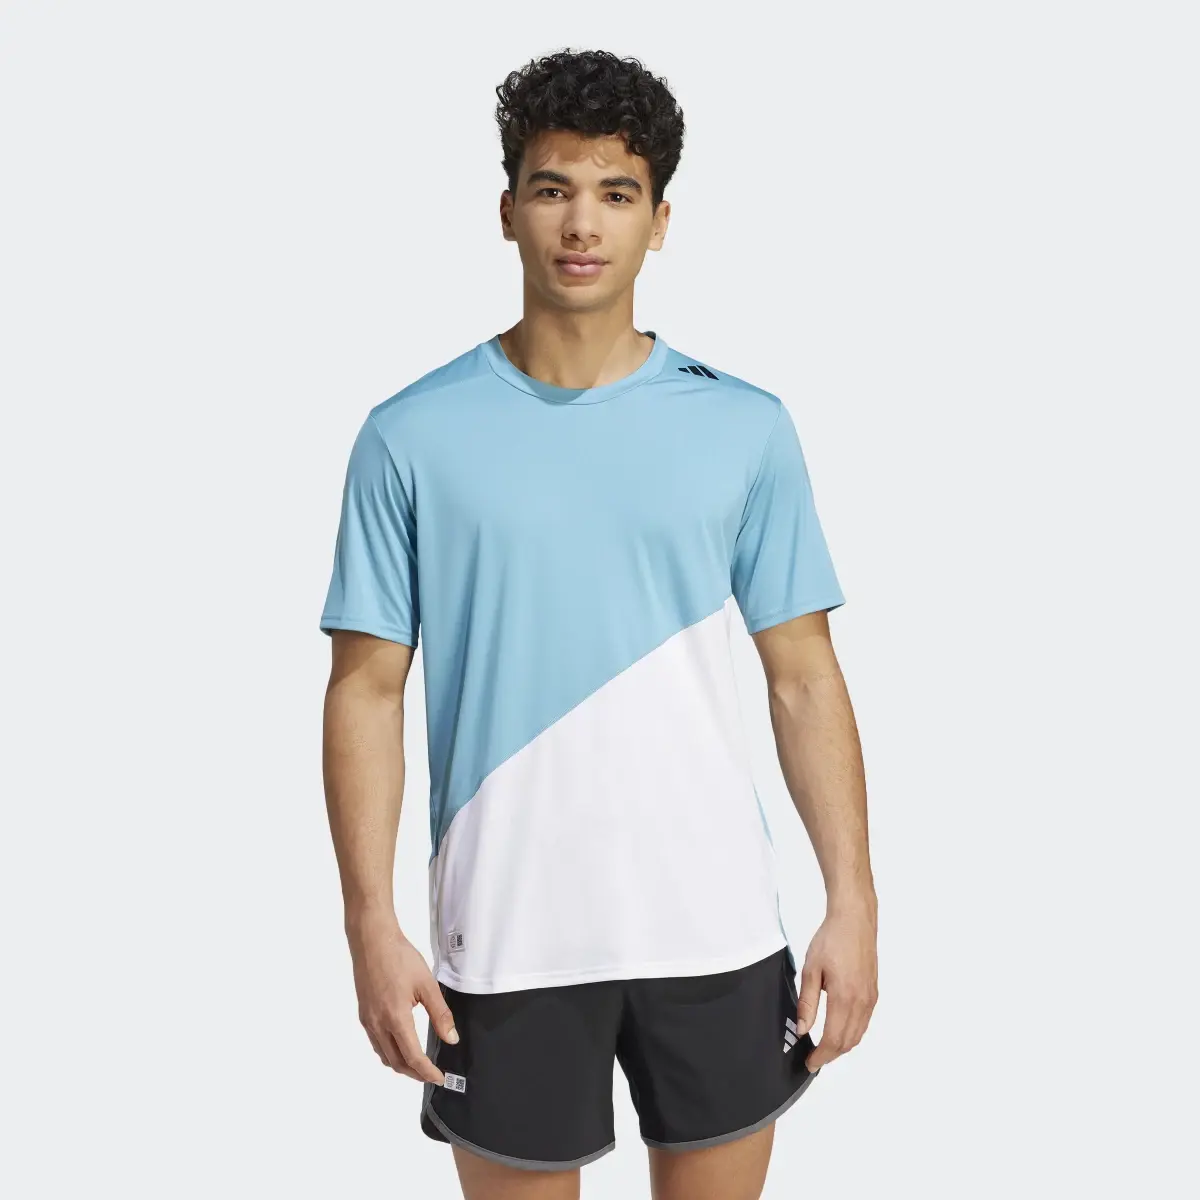 Adidas Made to be Remade Running Tee. 2